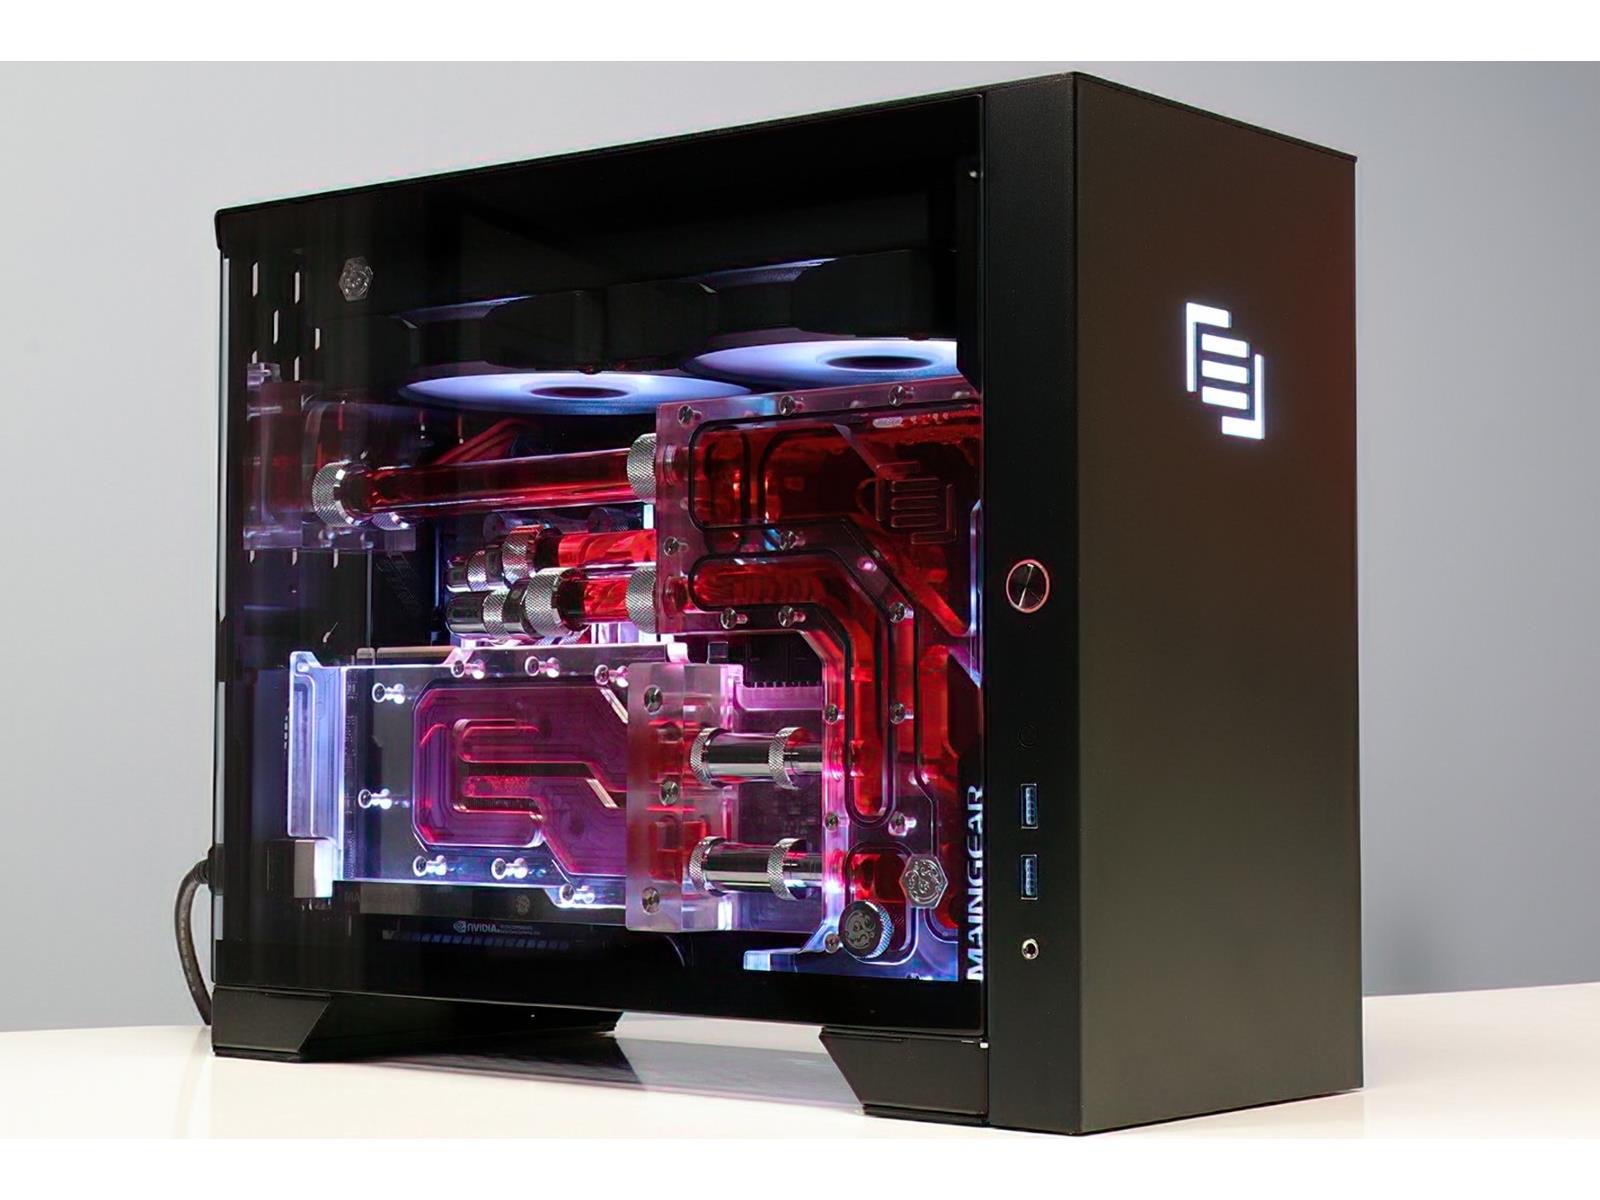 Maingear Review: Jaw-Dropping Mini-ITX Gaming PC |